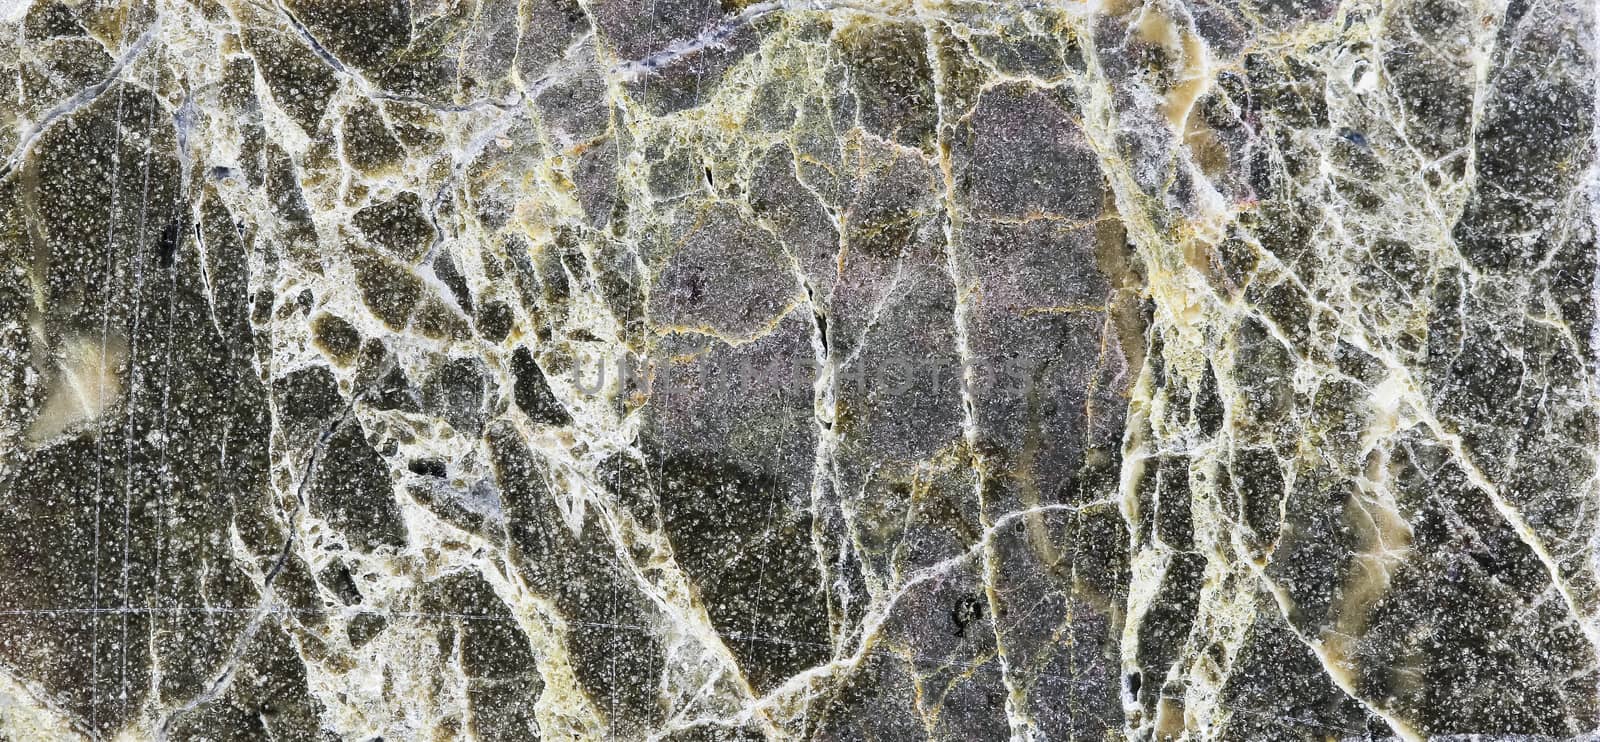 Marble stone background by art9858